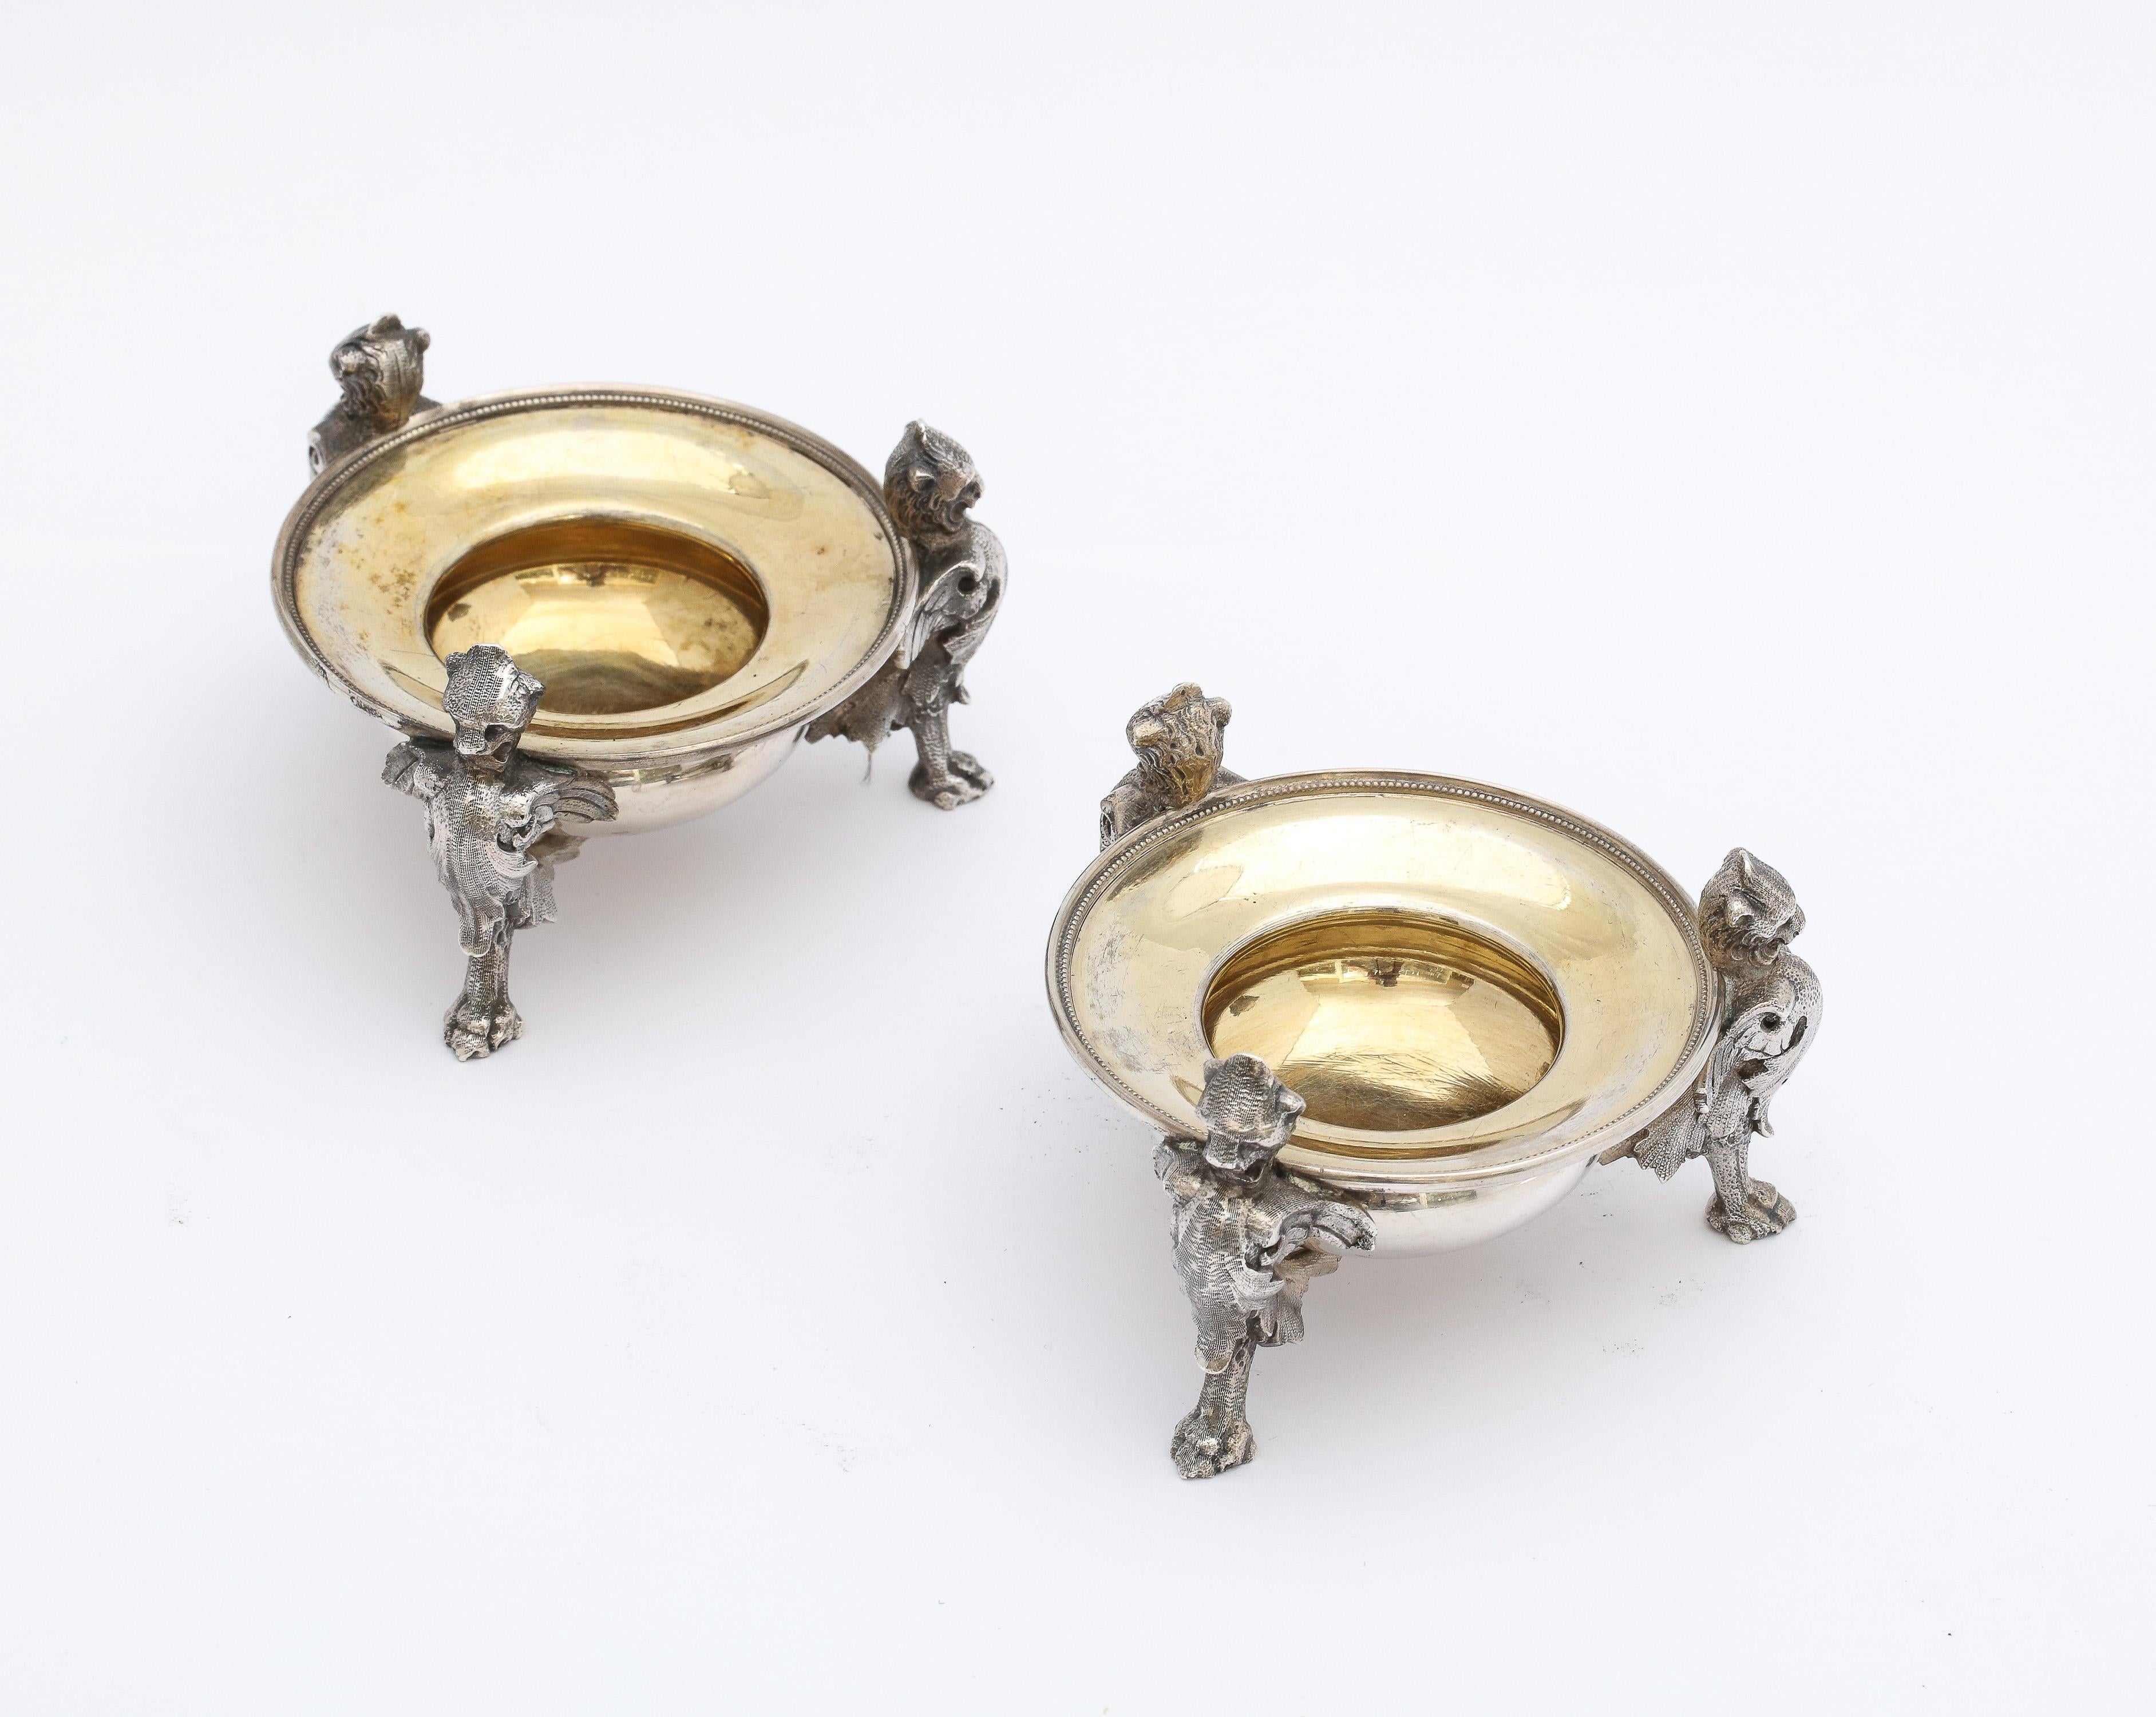 Mid-19th Century Pair of Neoclassical-Style Parcel Gilt Coin Silver Footed Salt Cellars By Gorham For Sale